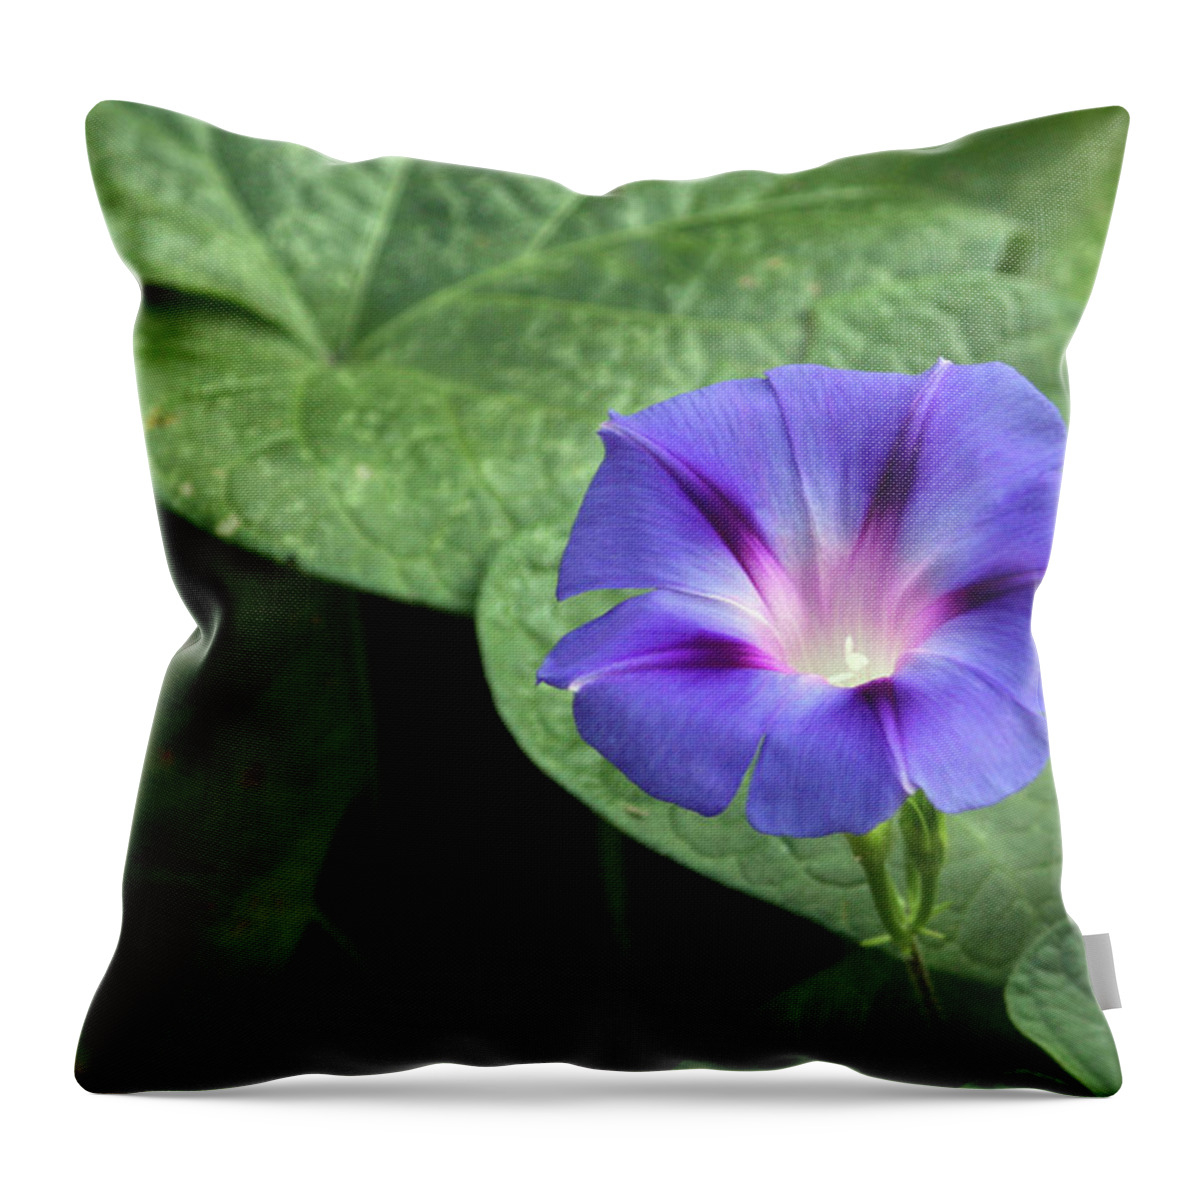 Single Throw Pillow featuring the photograph Morning Glory by Cathy Harper